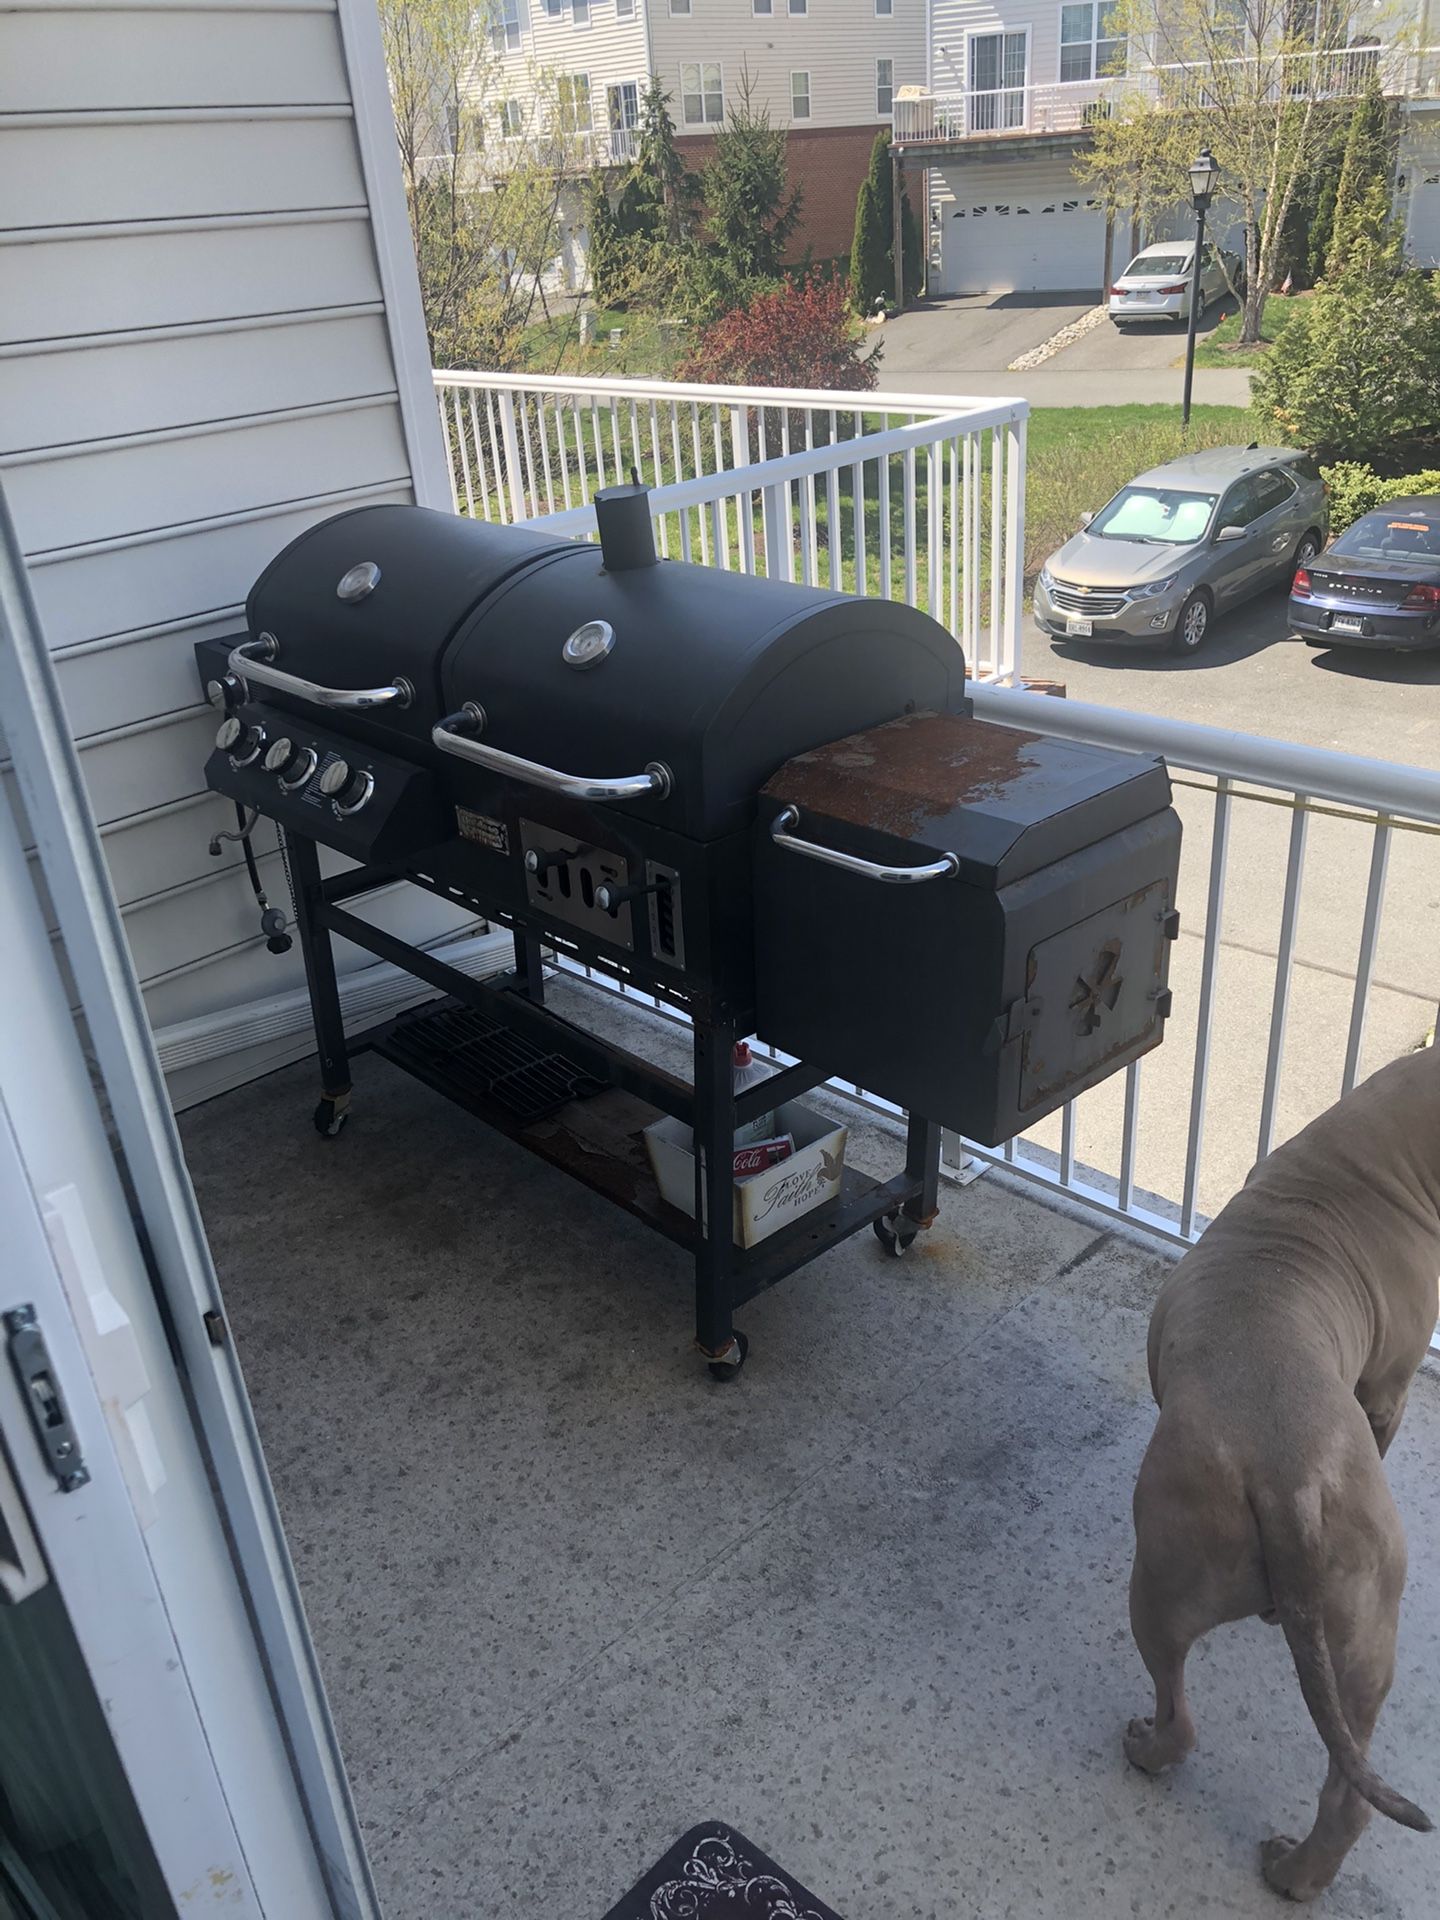 Gas/charcoal grill with smoker box